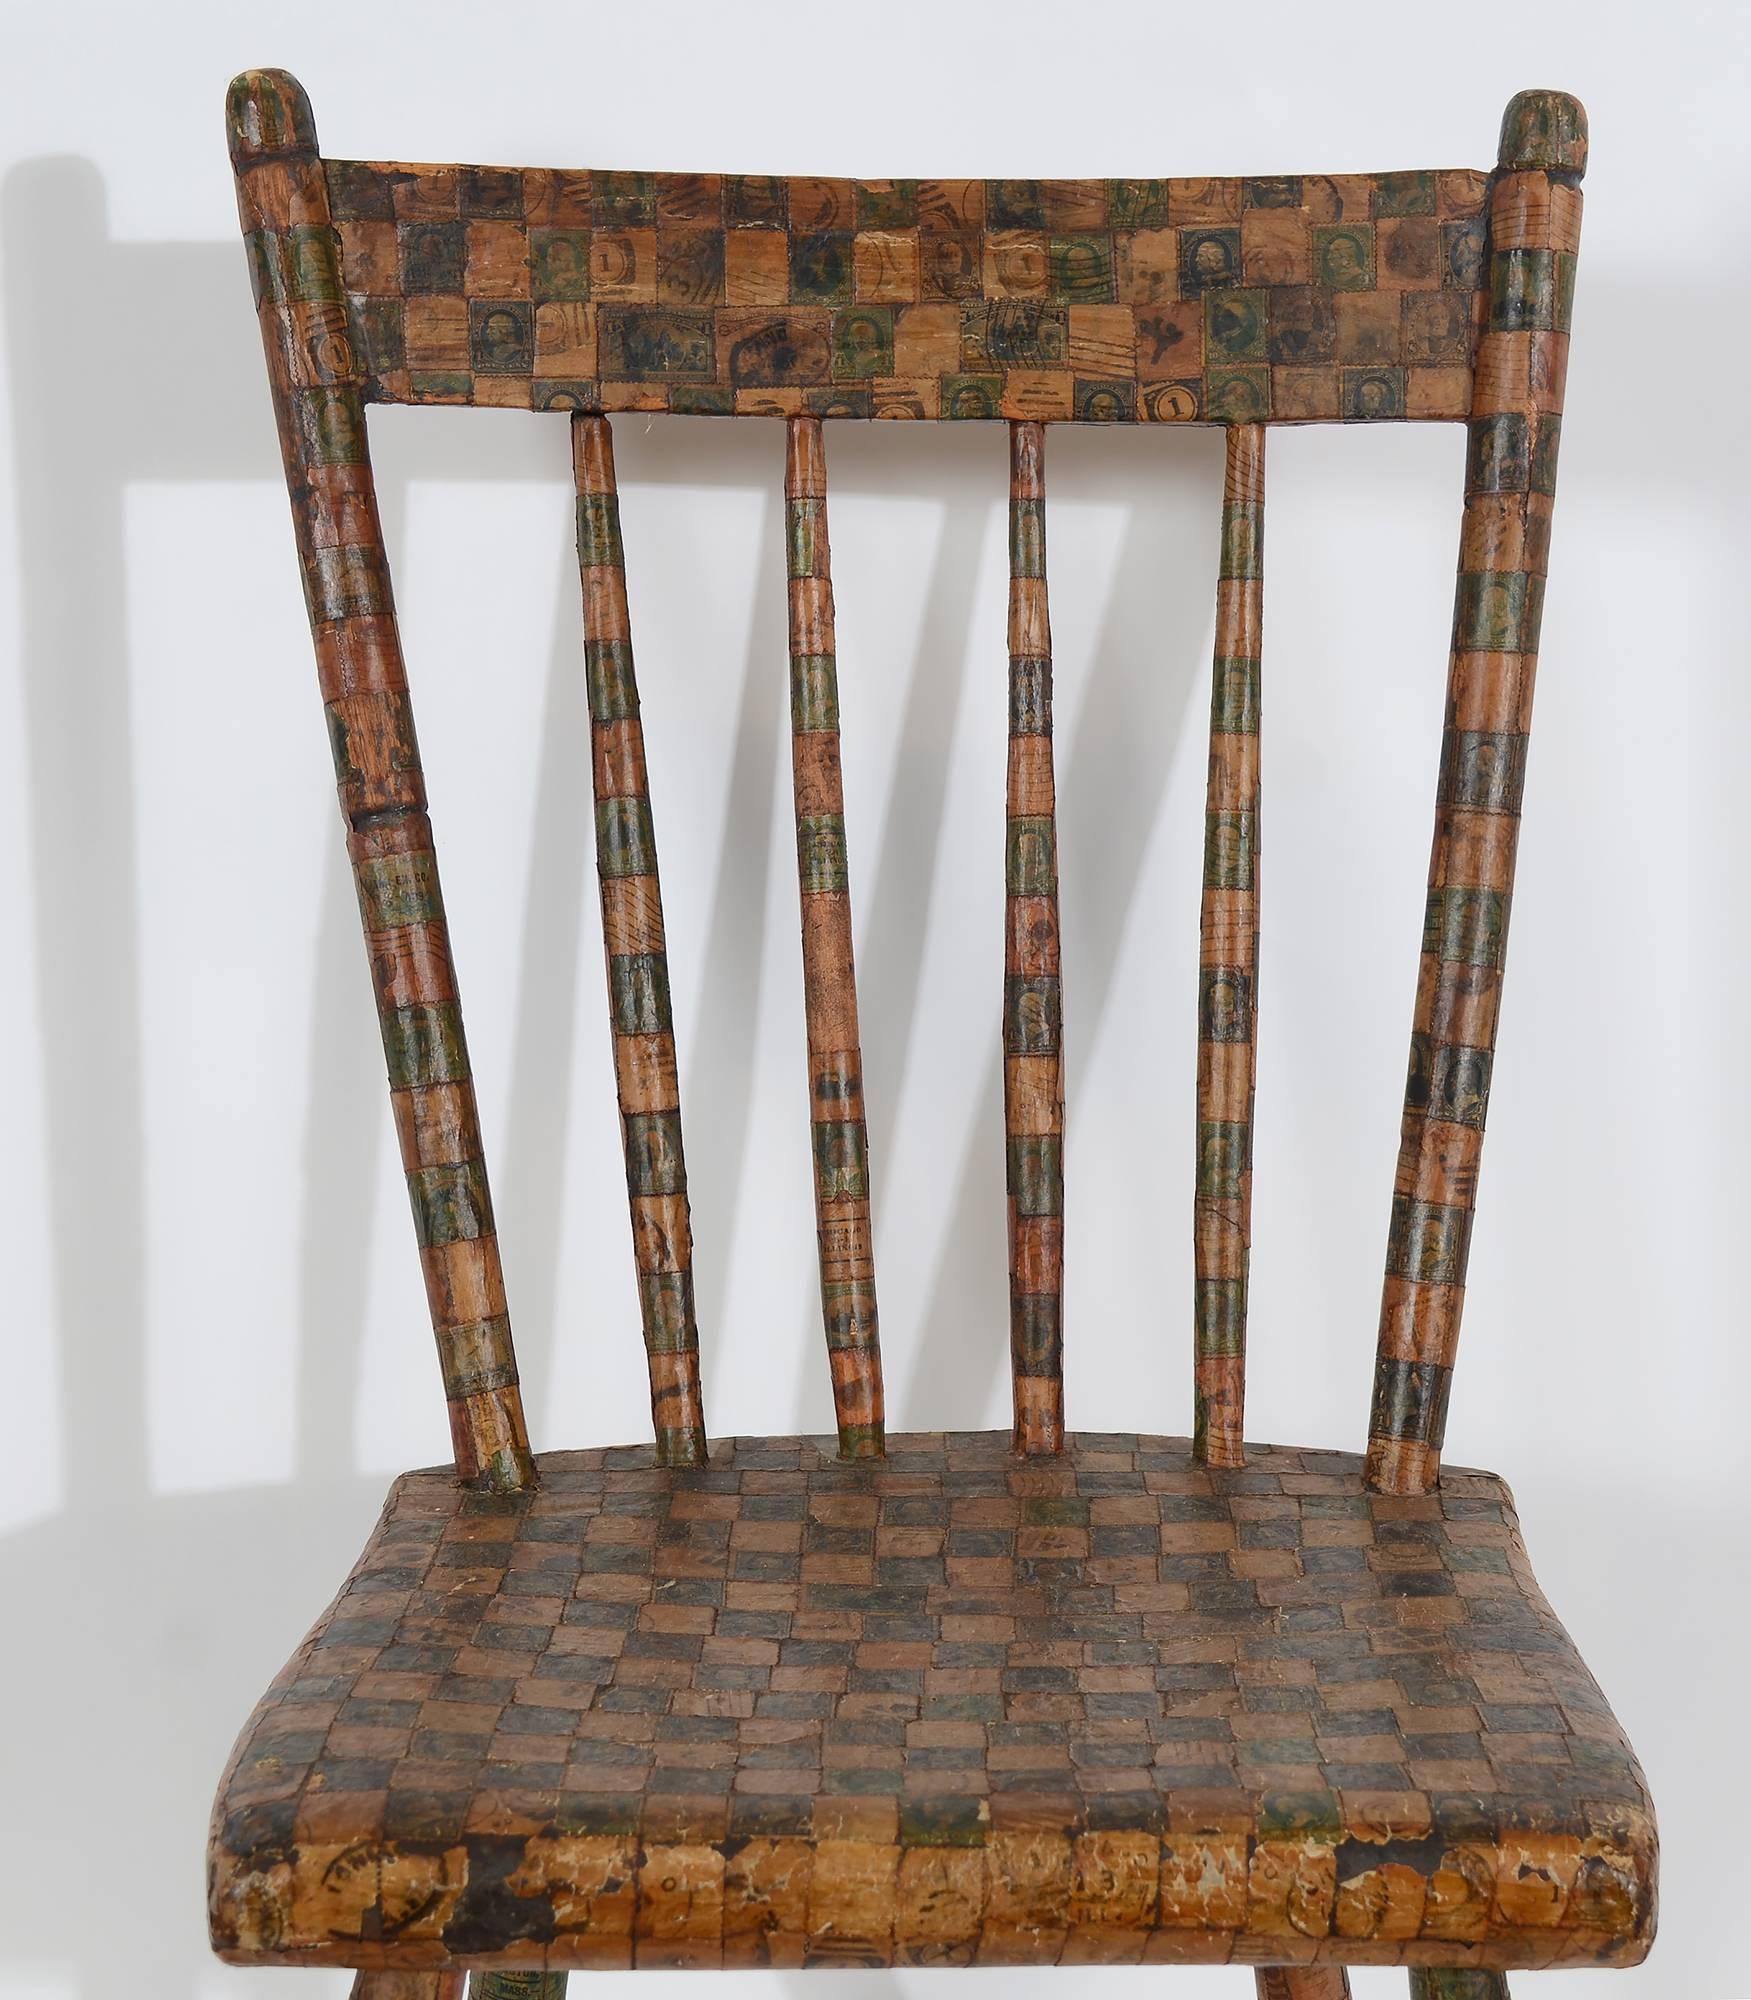 Découpage Chair Covered in Postage Stamps